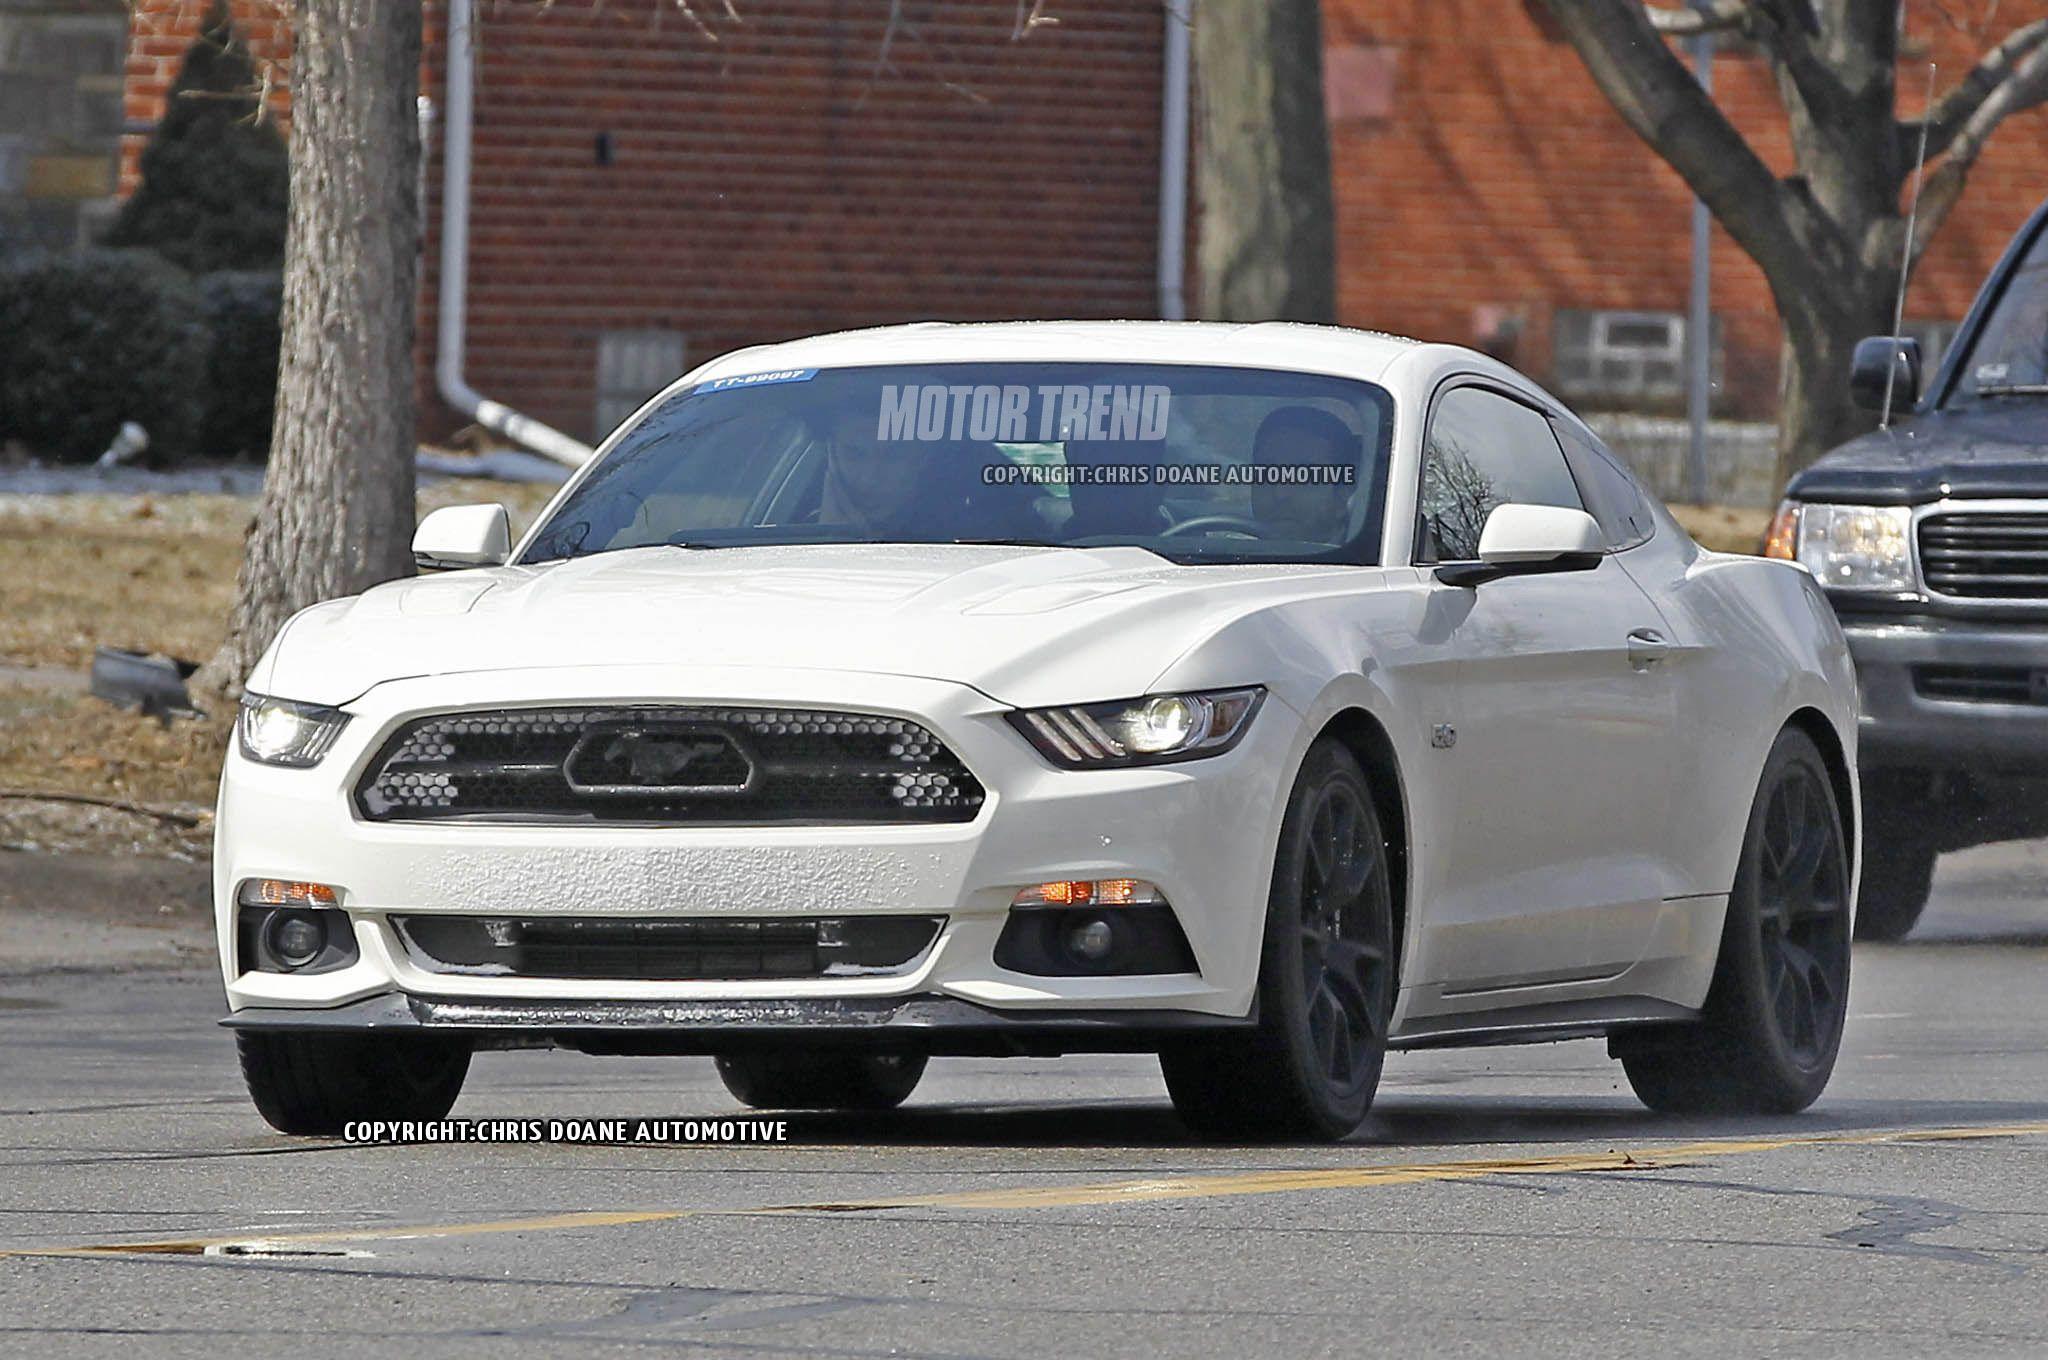 Ford Mustang 50th Anniversary Logo - 2015 Ford Mustang GT 50th Anniversary Caught Prowling the Streets ...